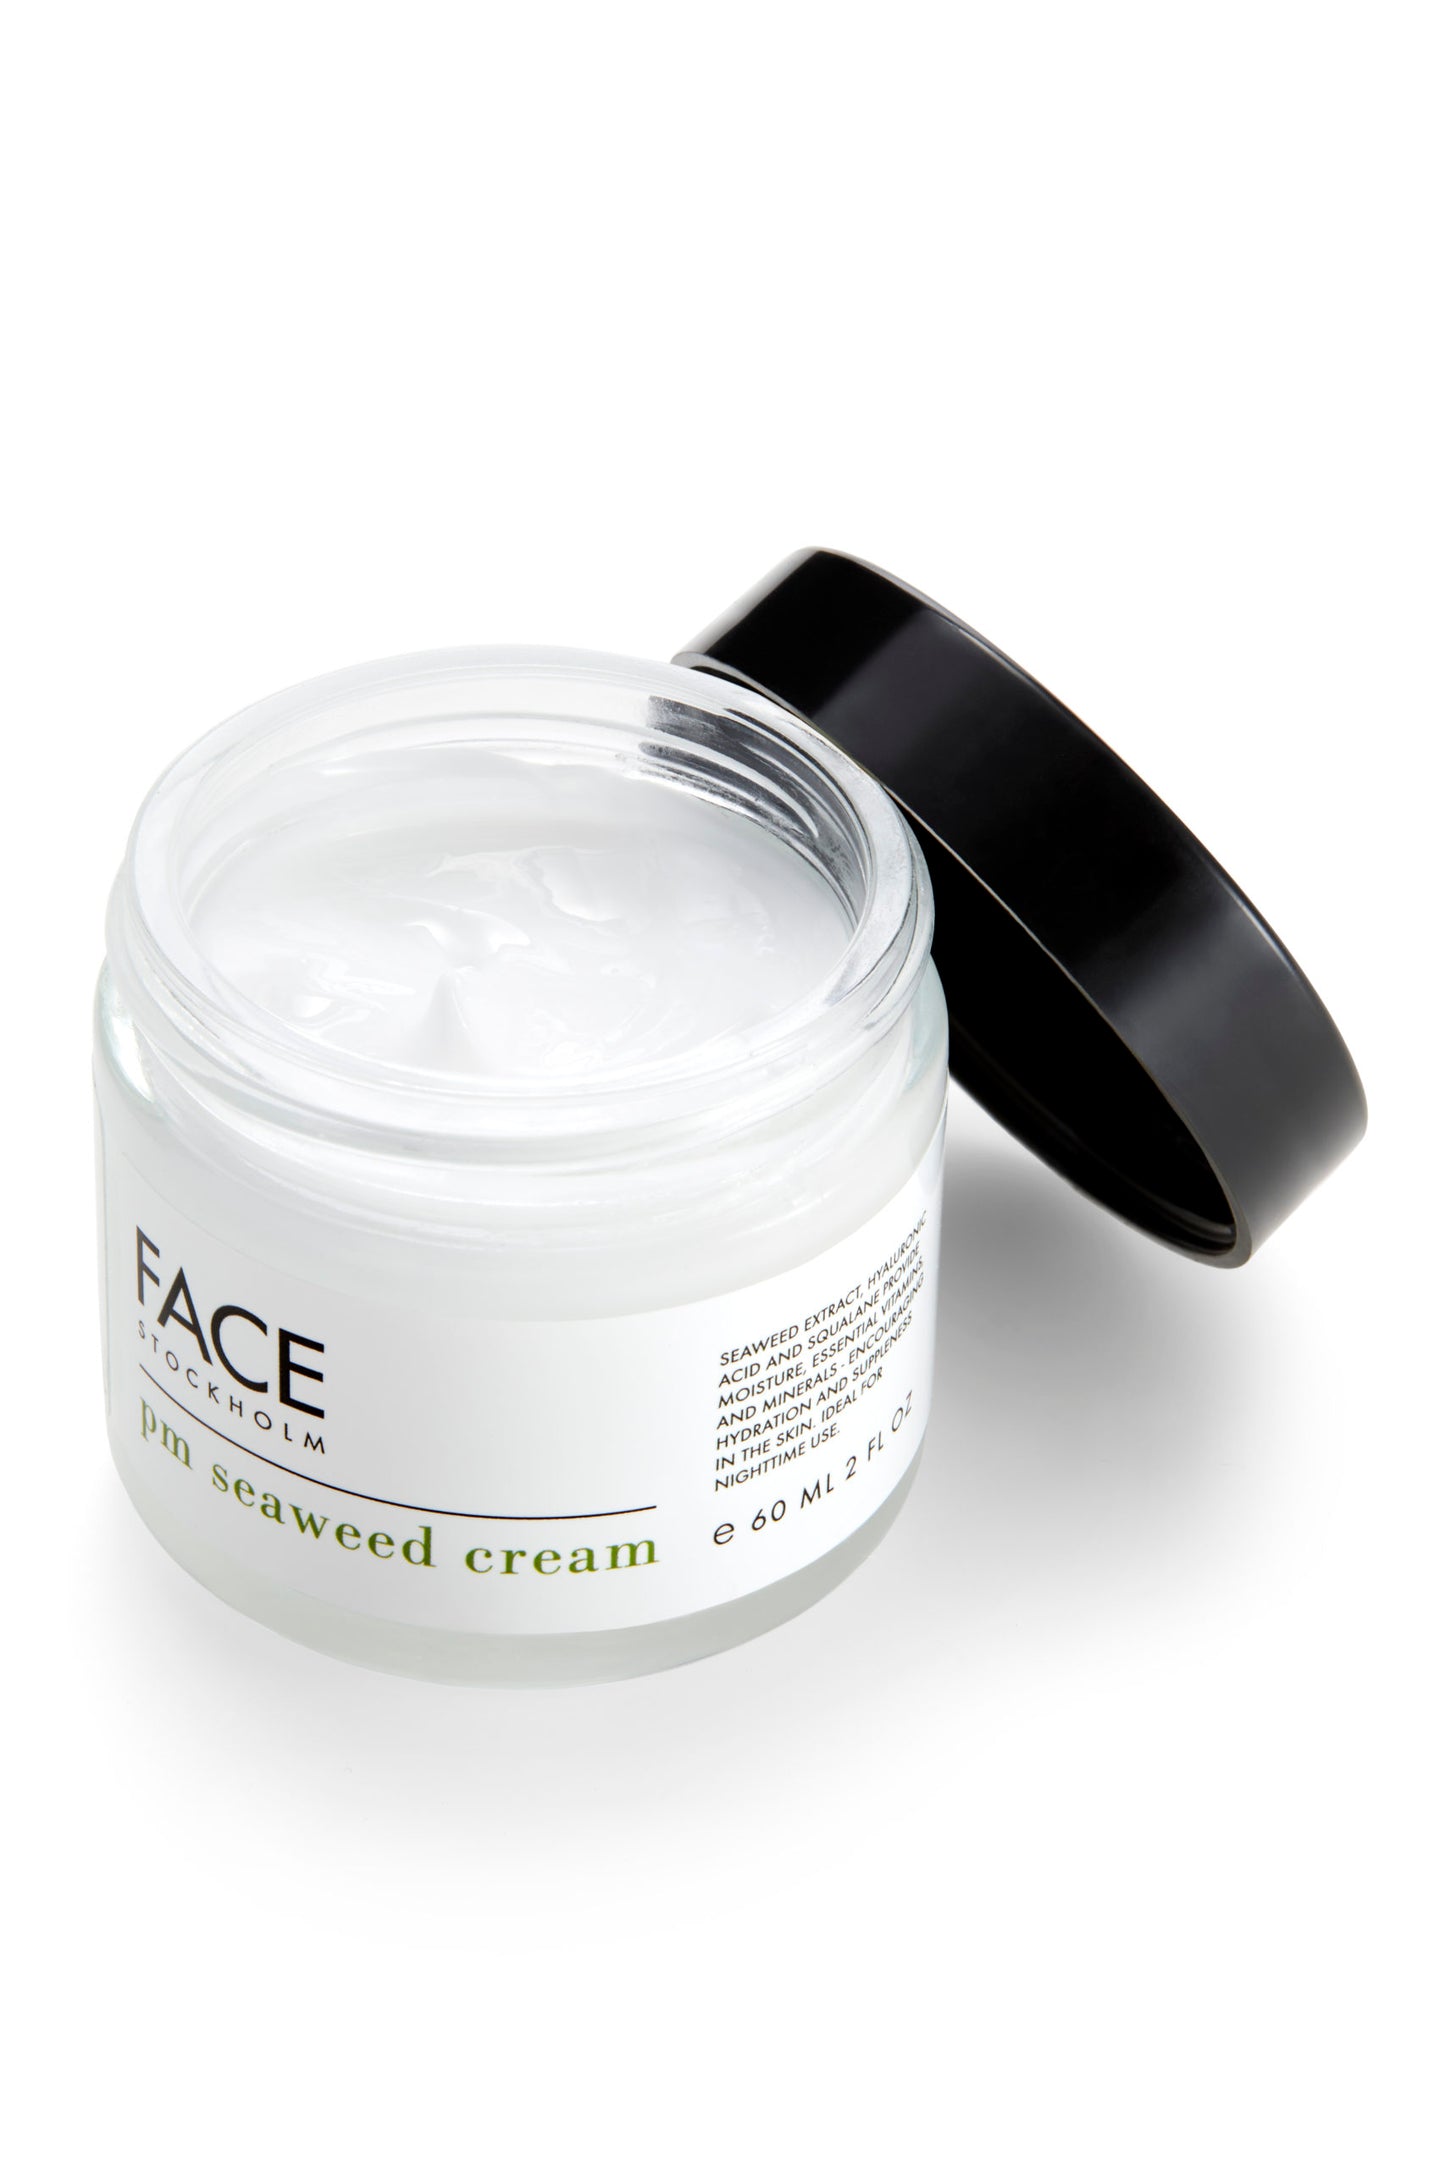 FACE Stockholm Daily Seaweed Cream PM